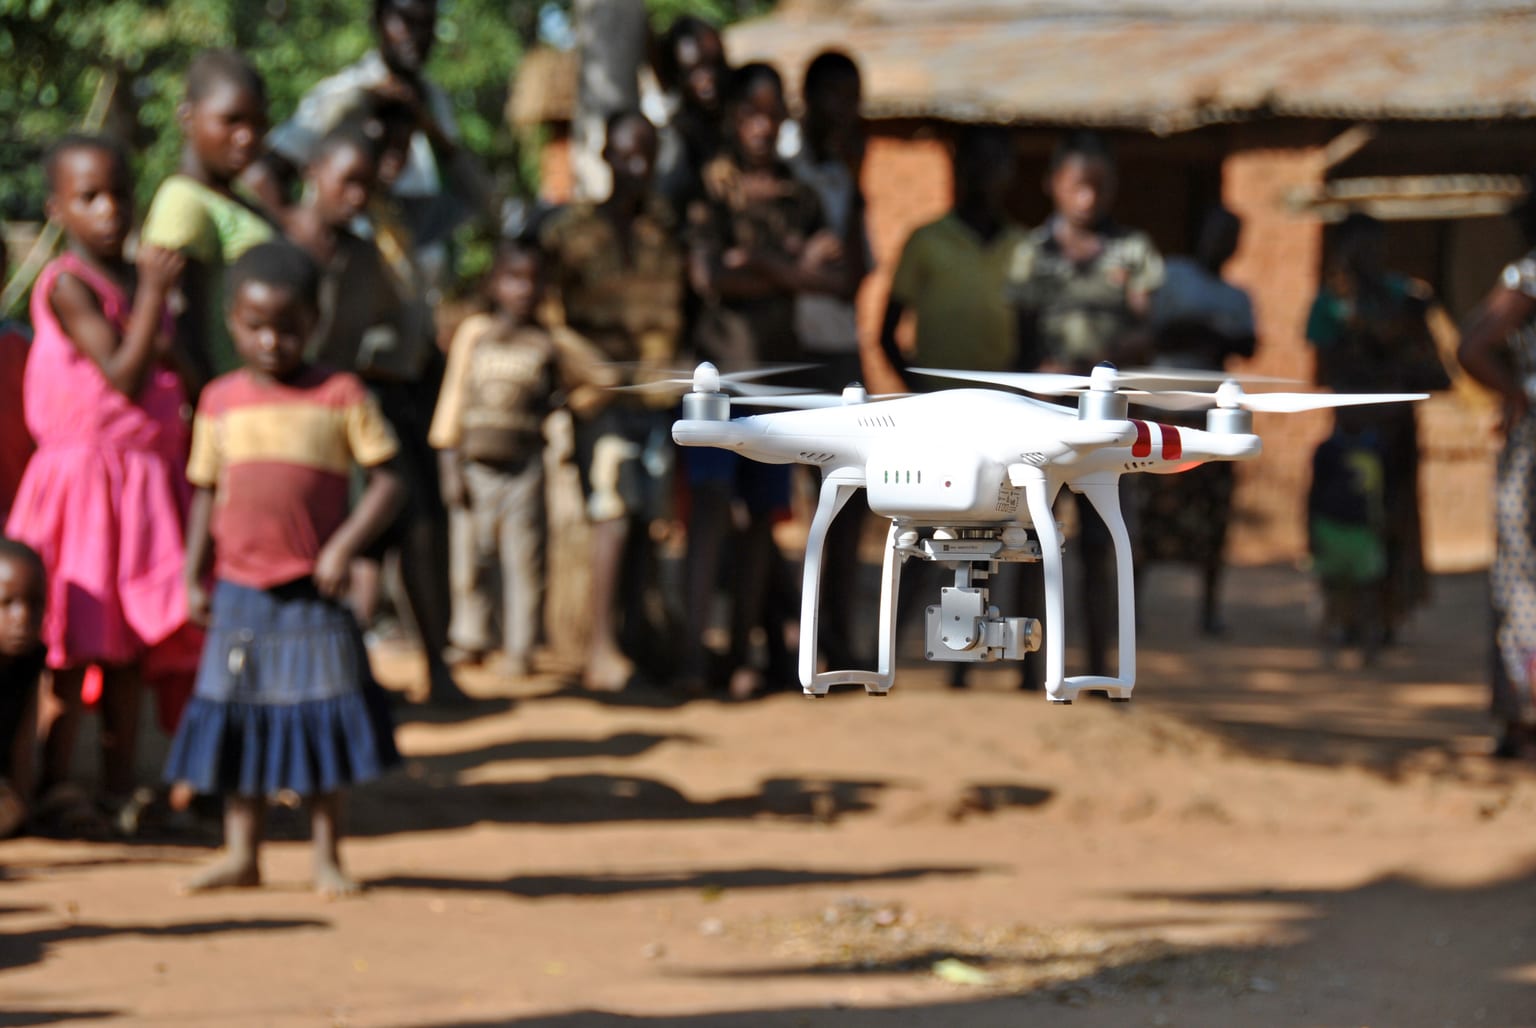 A drone operated by Chief Air Traffic Controller Steve Mkandawire, one of five Civil Aviation certified pilots, takes off during a demonstration for residents in Thipa vllage, Kasungu District, Malawi, Thursday 29 June 2017. Thipa village is 19 kilometres from the nearest health centre in Dwangwa and the only way to get there is either by bicycle or walking for four hours. On 29 June 2017, the Government of Malawi and UNICEF launch an air corridor to test potential humanitarian use of Unmanned Aerial Vehicles (UAVs), also known as drones. The corridor is the first of its kind in Africa and one of the first globally with a focus on humanitarian and development use. It is centred on Kasungu Aerodrome, in central Malawi, with a 40 kilometre radius (80 kilometre diameter) and is designed to provide a controlled platform for the private sector, universities and other partners to explore how UAVs can be used to help deliver services that benefit communities. The UAV corridor will run for at least one year, until June 2018. Since the announcement in December 2016, 12 companies, universities and NGOs from around the world have applied to use the corridor. These include drone manufacturers, operators and telecom companies such as GLOBHE (Sweden) in collaboration with HemoCue and UCANDRONE (Greece), and Precision (Malawi), all of which were present at the launch to demonstrate connectivity, transportation and imagery uses respectively. UAV technology is still in the early stages of development. UNICEF is working globally with a number of governments and private sector partners to explore how UAVs can be used in low income countries. All projects adhere to a strict set of innovation principles, with a focus on open source and user-centred design.